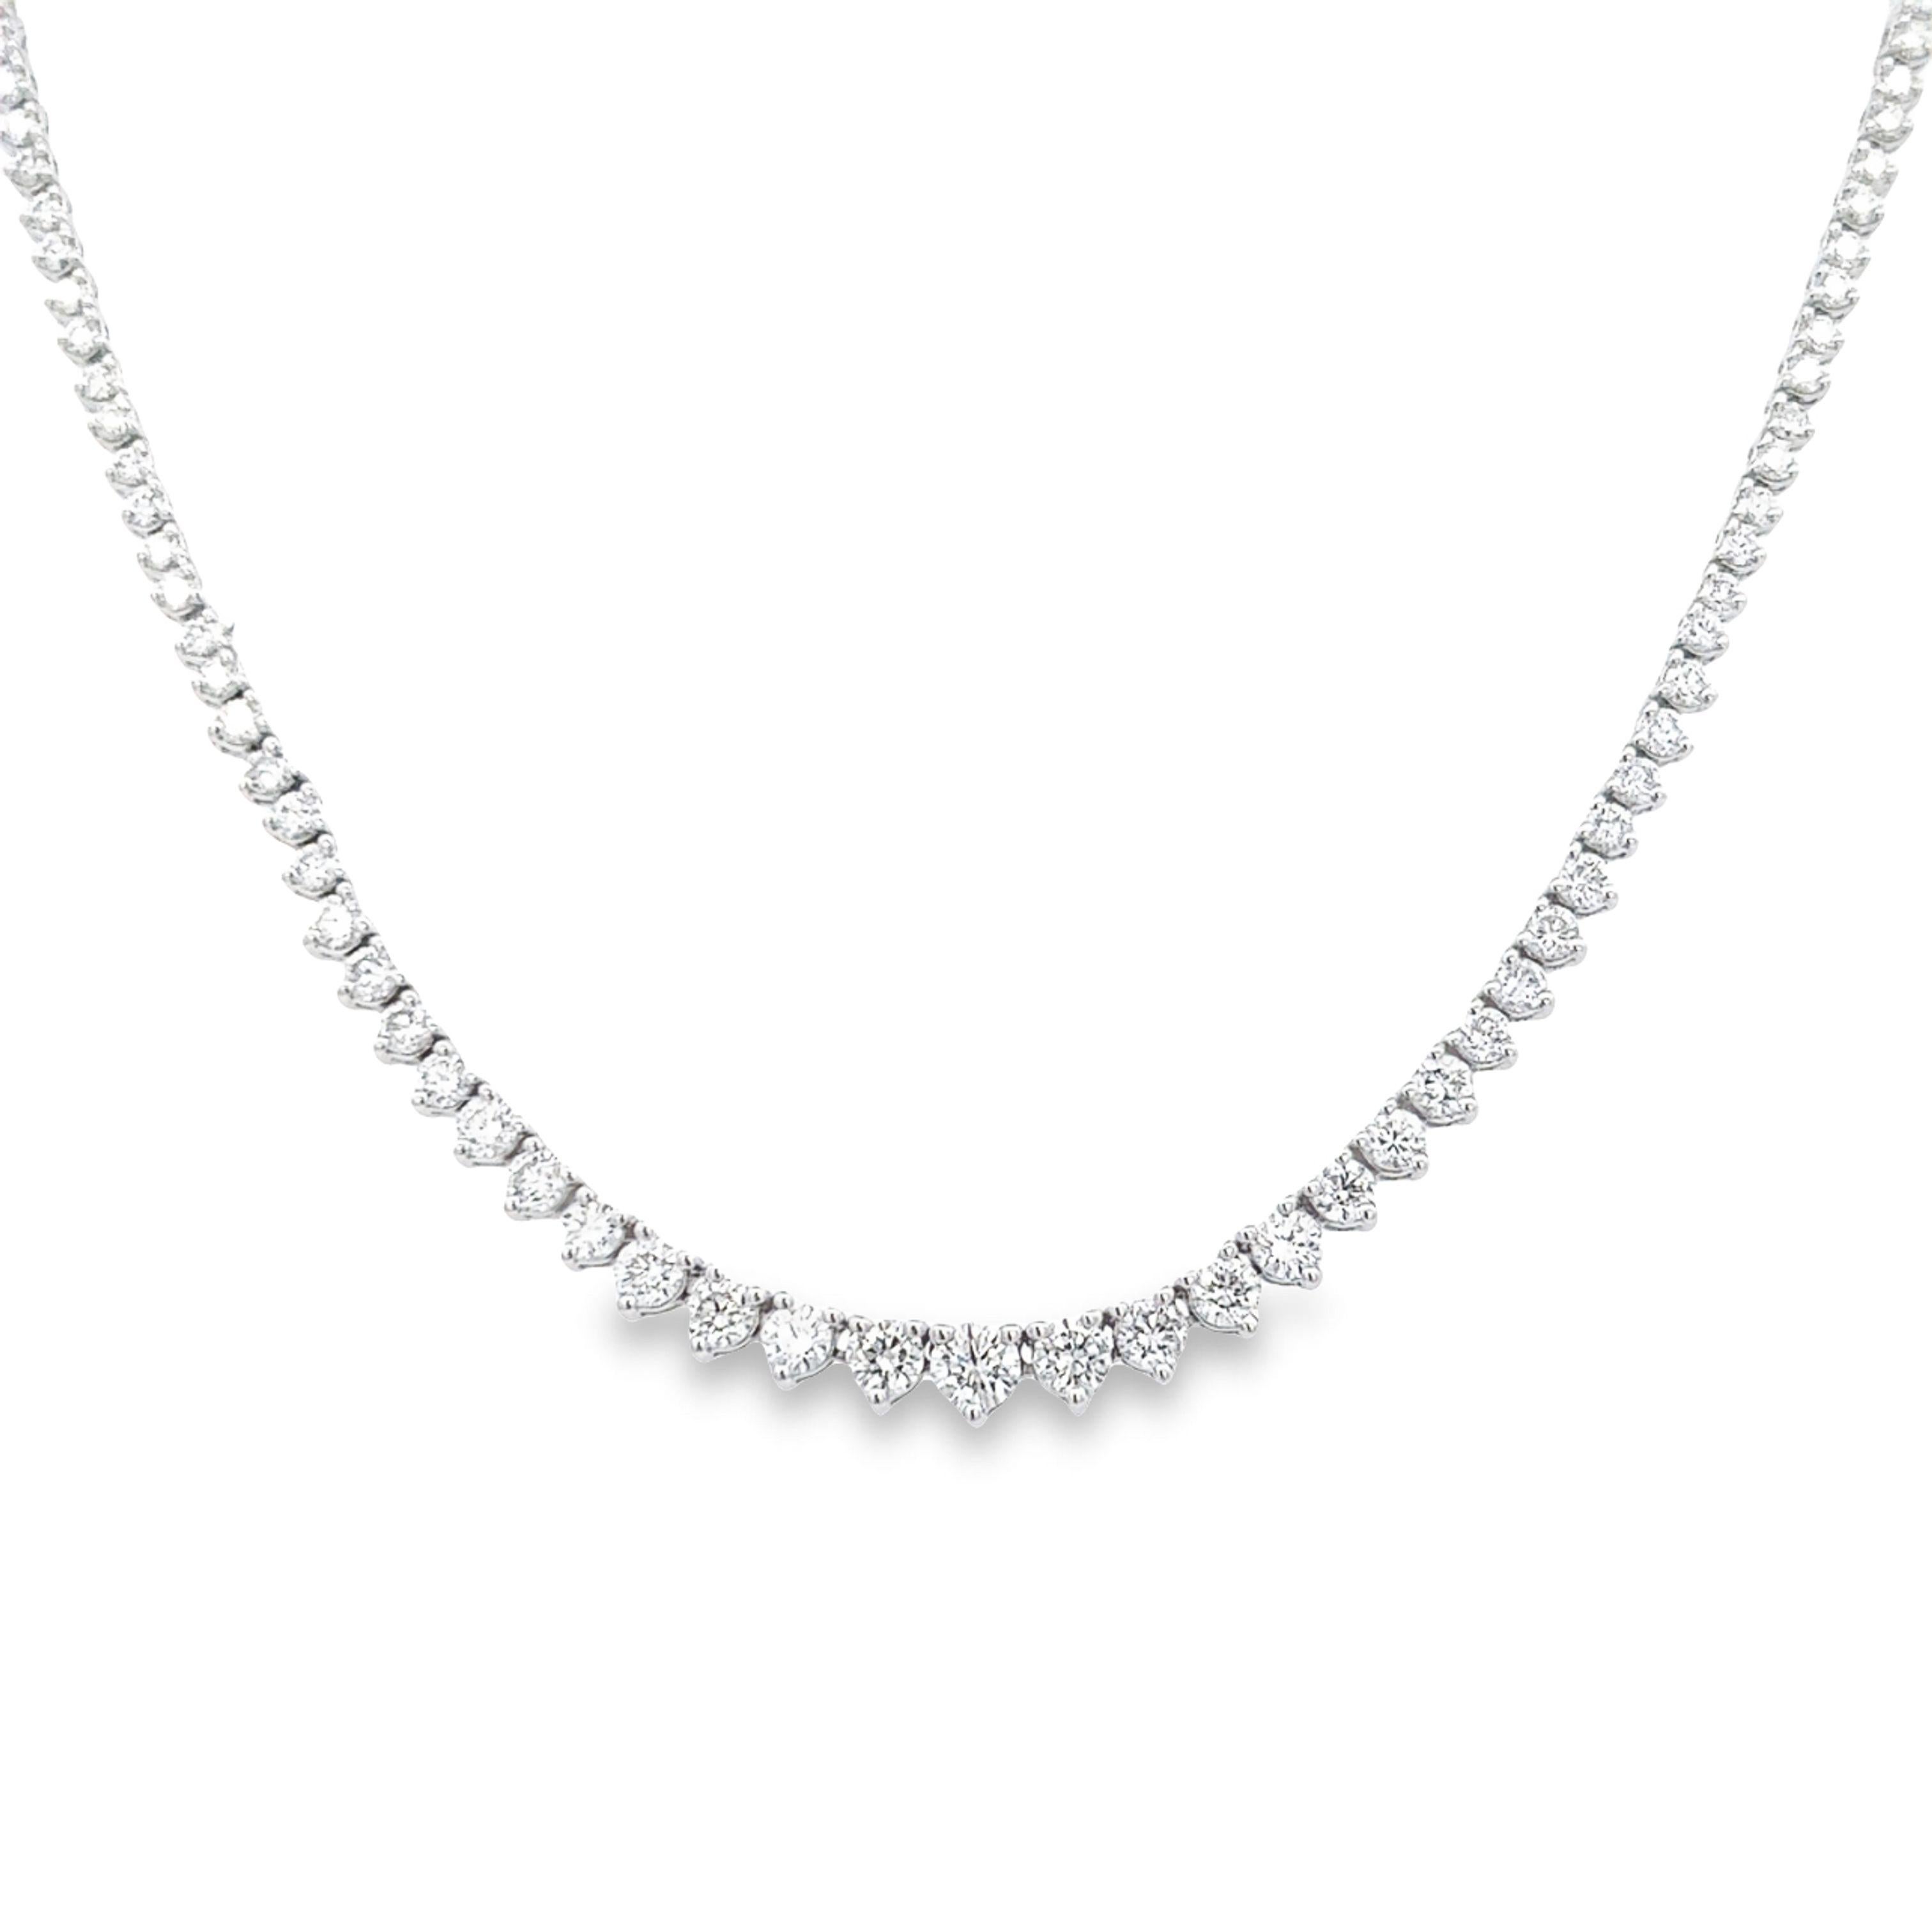 Beautiful and classic diamond tennis riviera necklace, by Alexander Beverly Hills.
217 round brilliant diamonds, 3.60 carats. Approximately F/G color and VS clarity. 14k white gold, three-prong, 11.38 grams, 17n.
Accommodated with an up-to-date